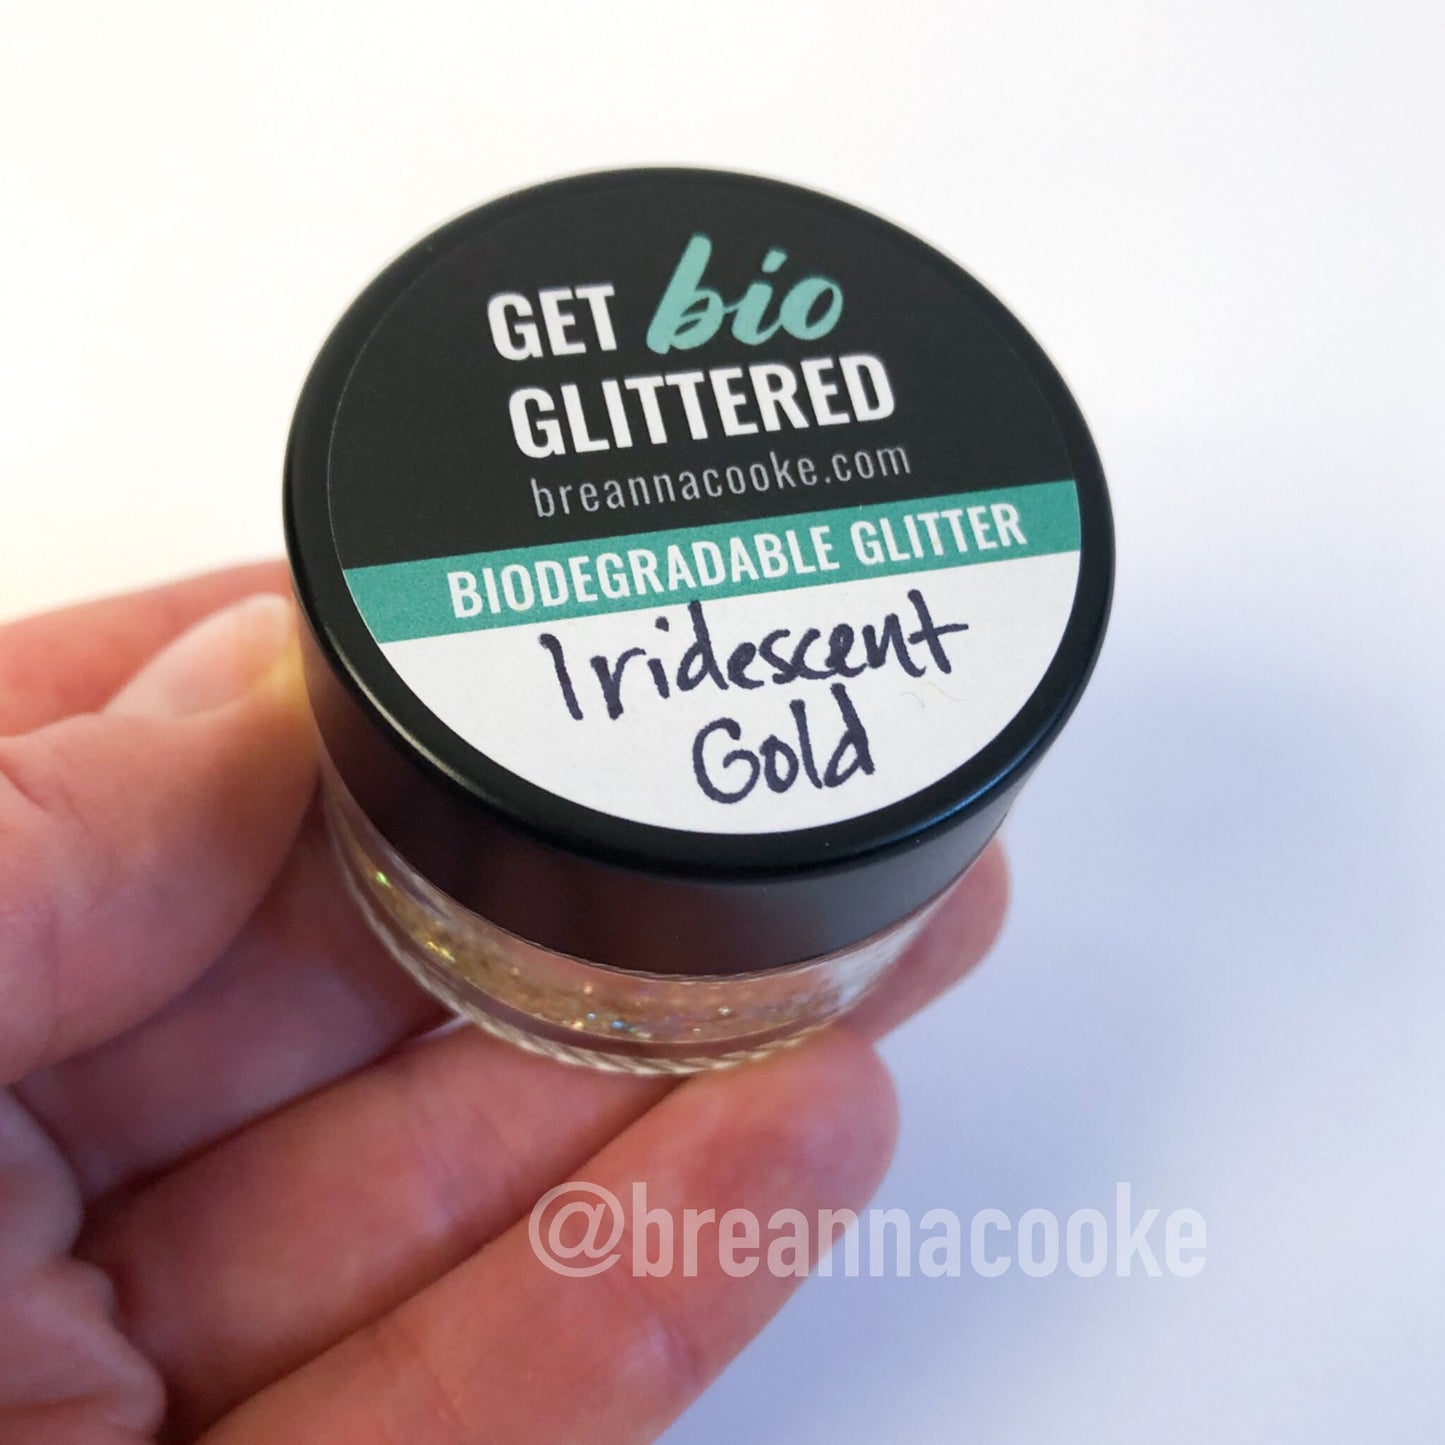 Biodegradable Glitter for Face and Body Painting, Festivals | 6g | Glass Jar | Iridescent Gold or Iridescent Silver Mix